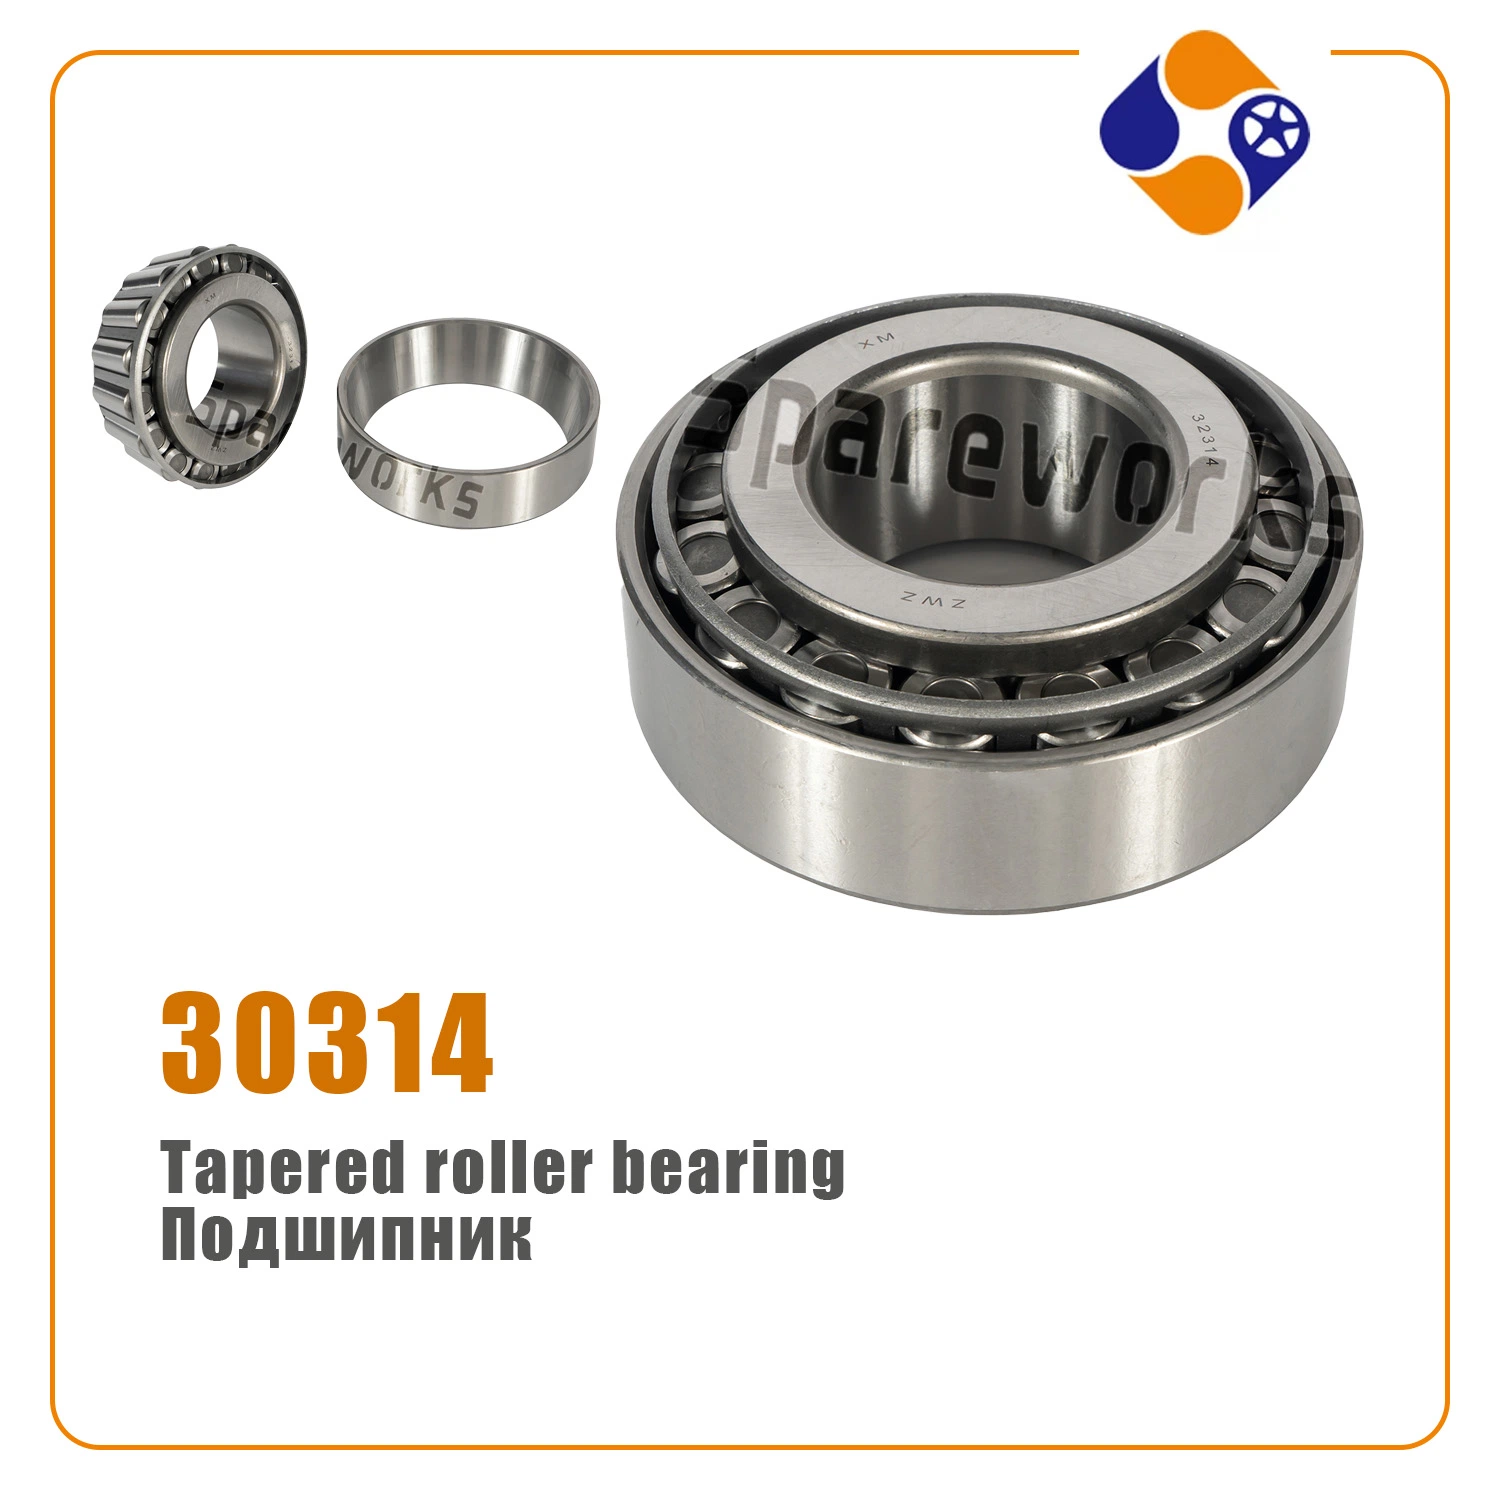 Tapered Roller Bearing for Sinotruk HOWO FAW Shacman Foton Dongfeng Commins Weichai, Yuchai XCMG Shantui Xgma Sany Engine Truck Spare Parts OEM Factory Original